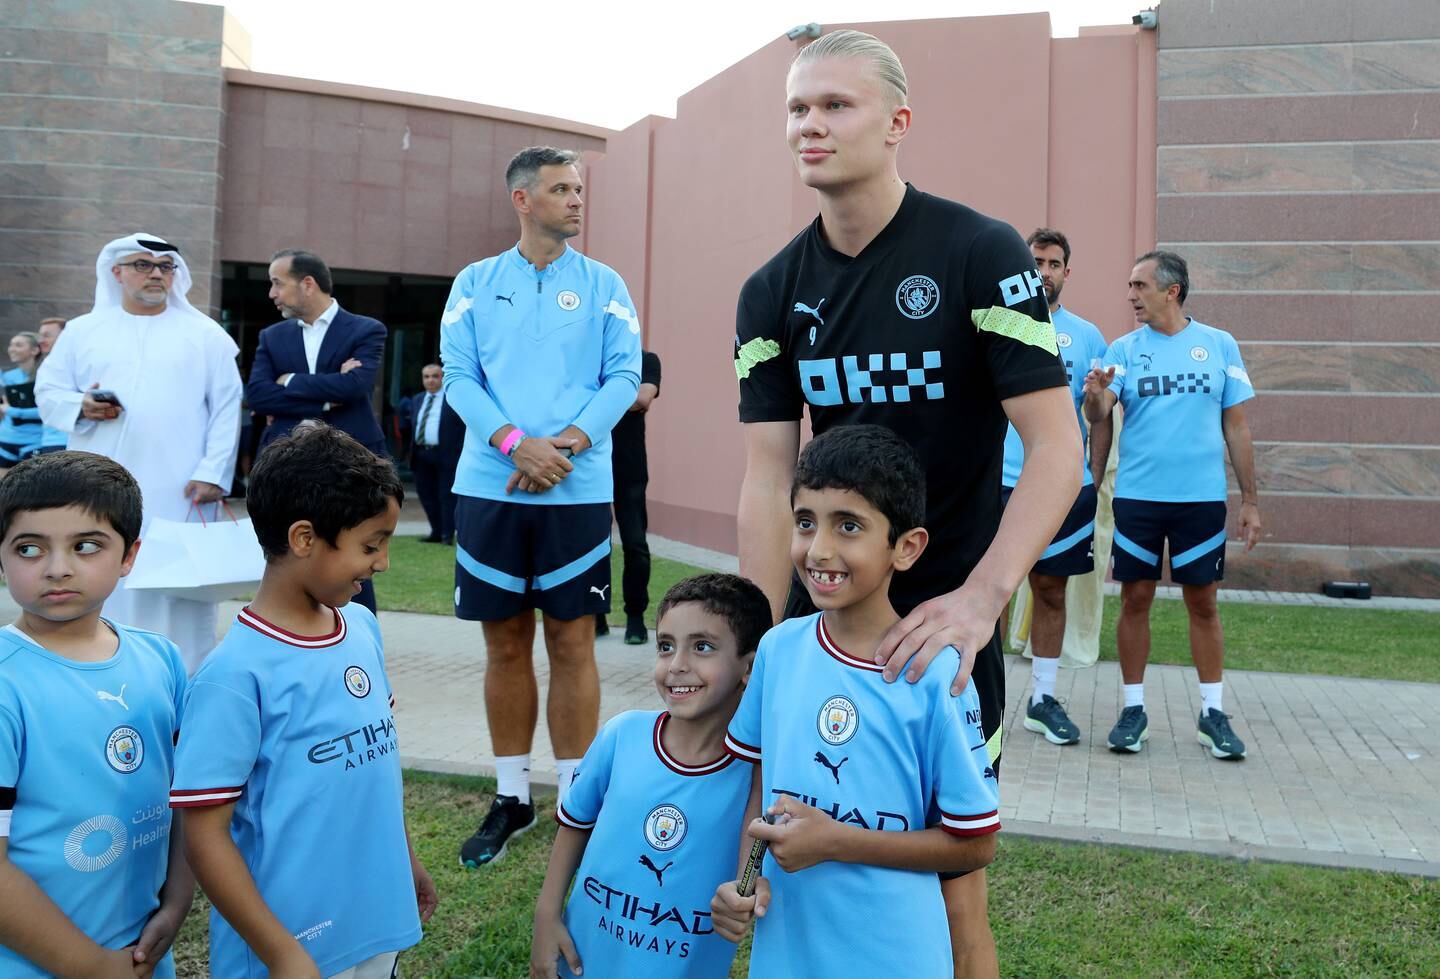 Erling Haaland took some time during training to meet with local Manchester City fans. Chris Whiteoak / The National